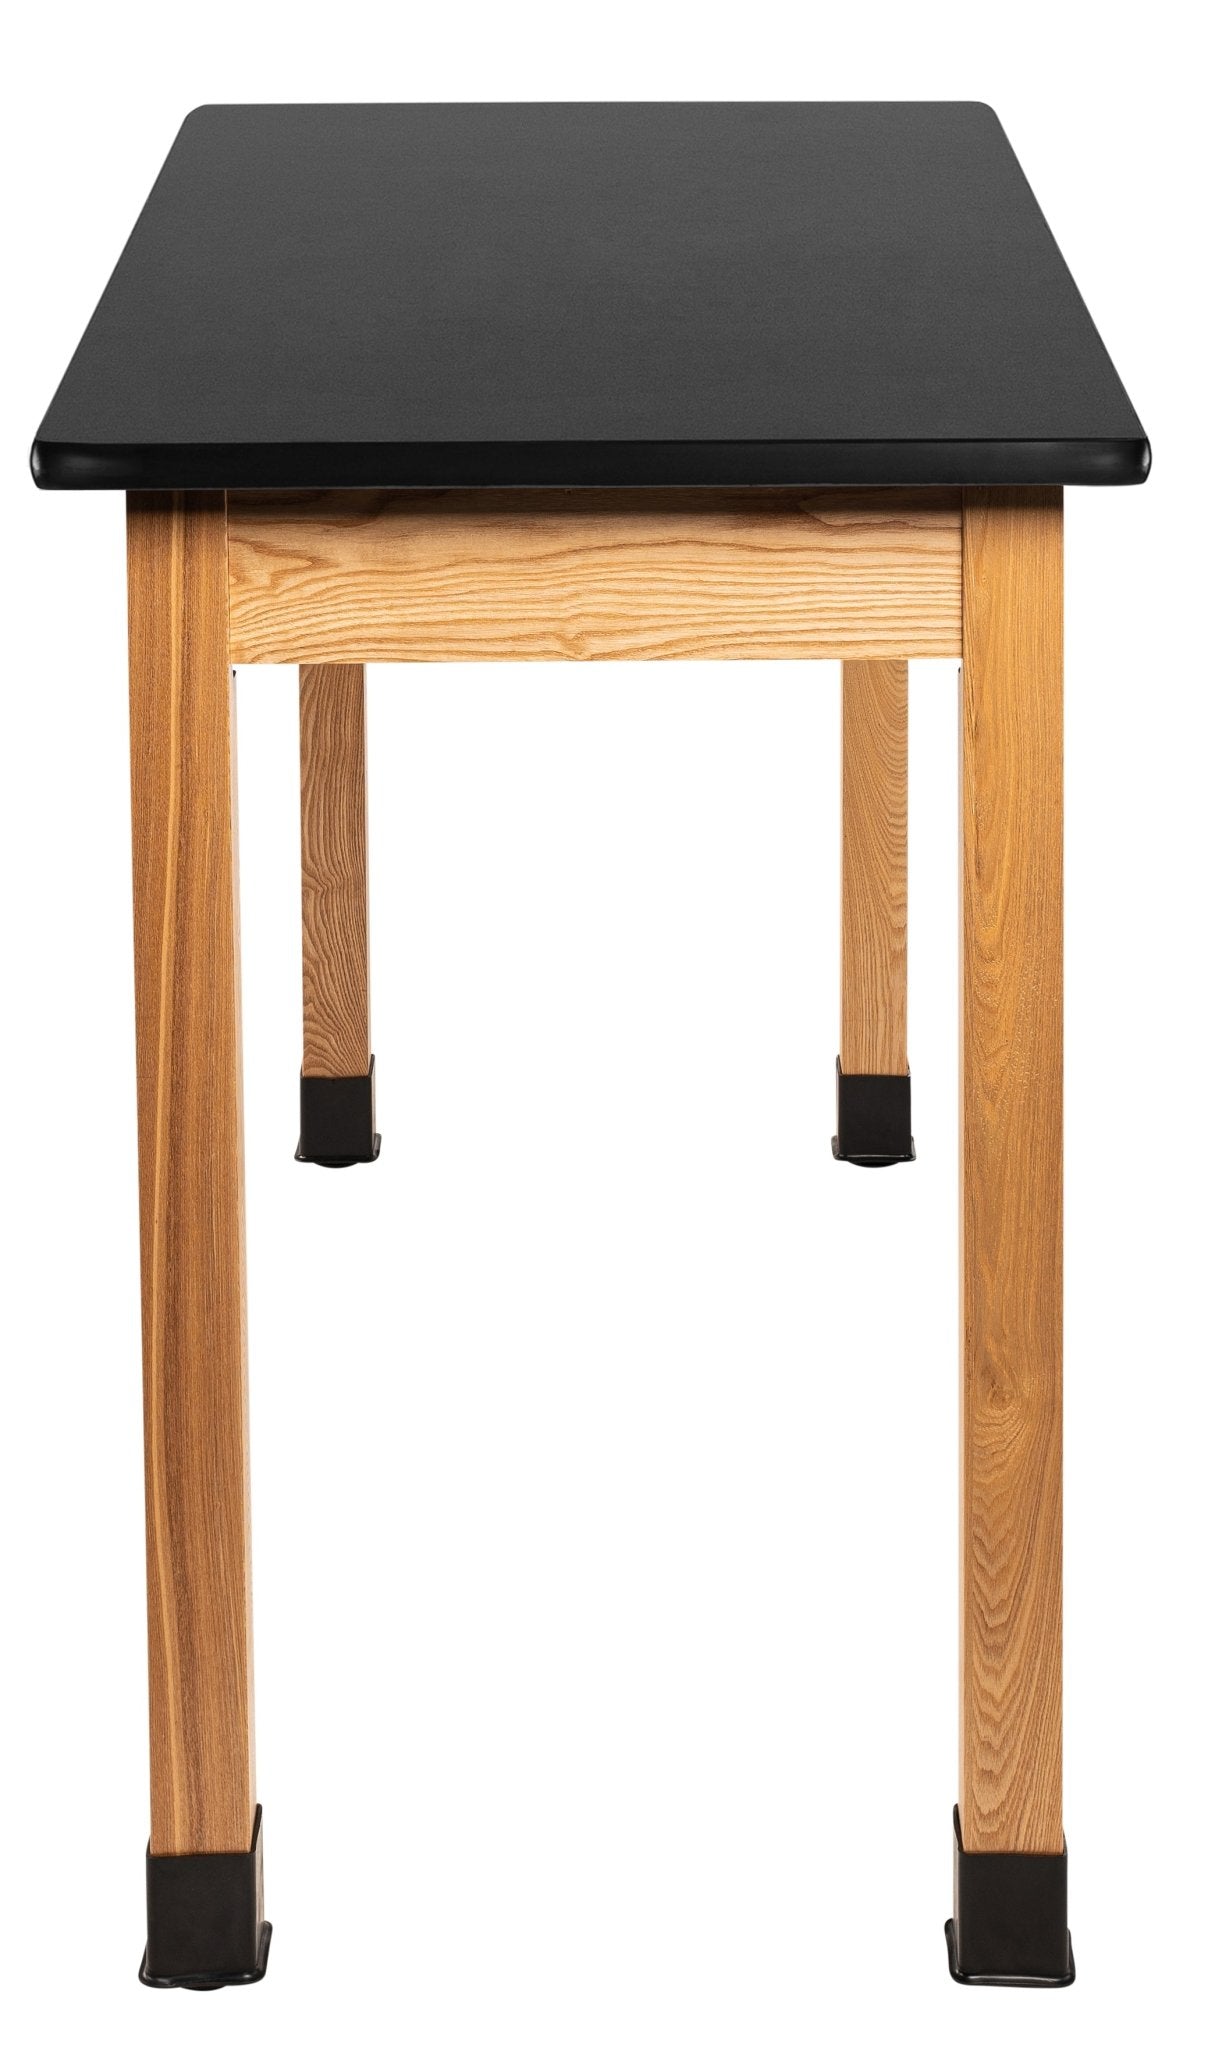 NPS Science Lab Table - High Pressure Laminate Top - w/ Book Compartment - 30"W x 72"D (National Public Seating NPS-SLT2-3072HB) - SchoolOutlet